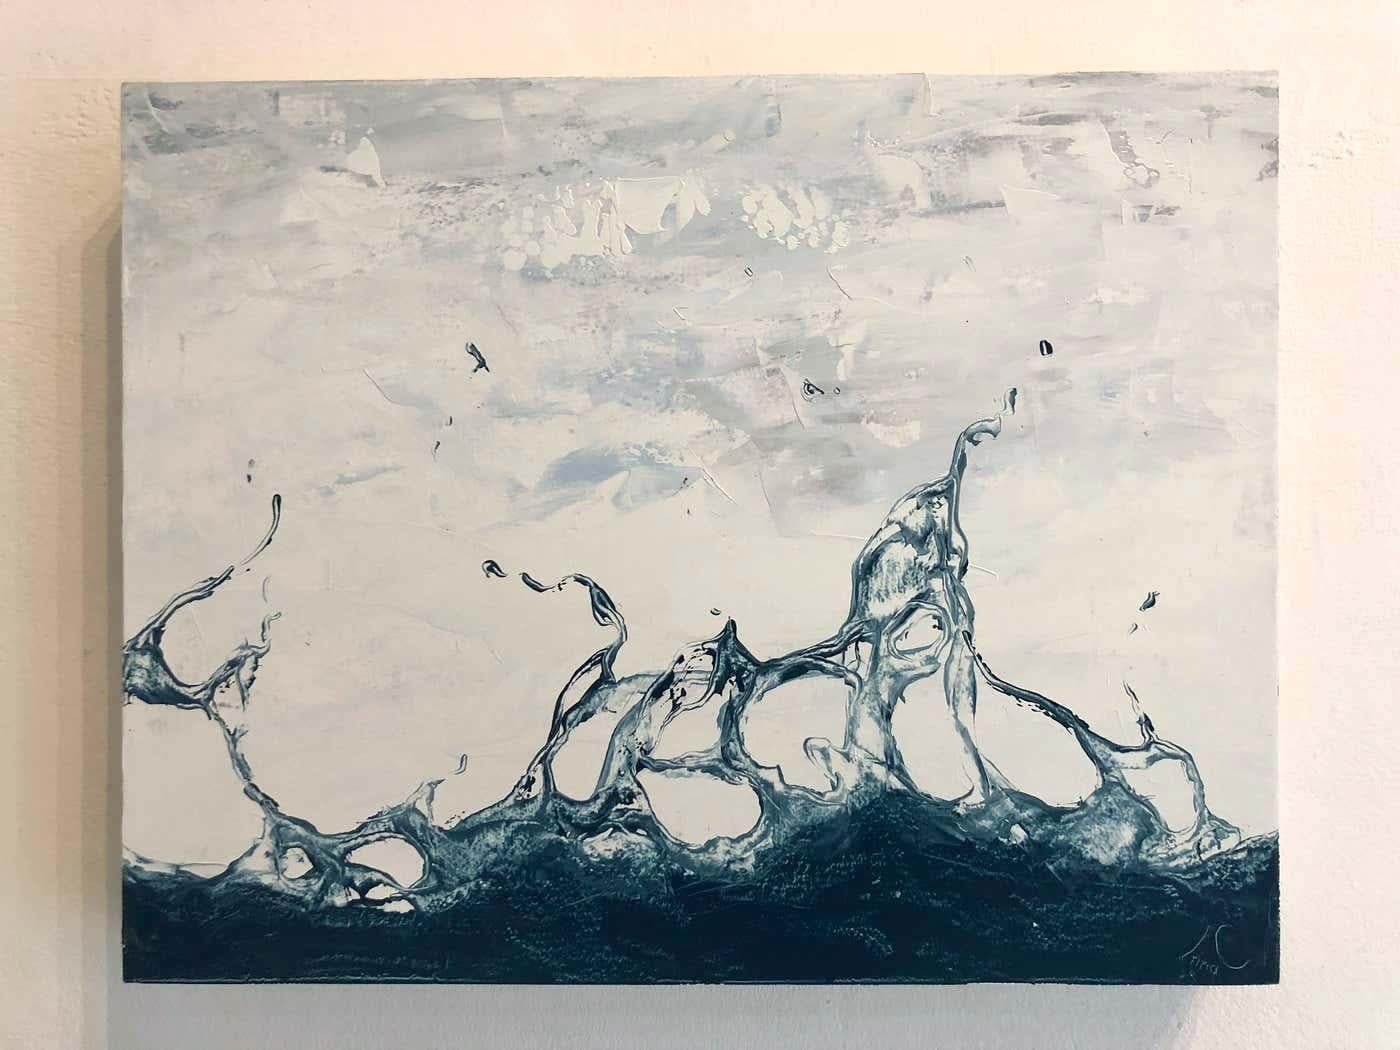 Dancing Water 42-original realism water pattern oil painting-contemporary Art - Realist Painting by Irina Cumberland